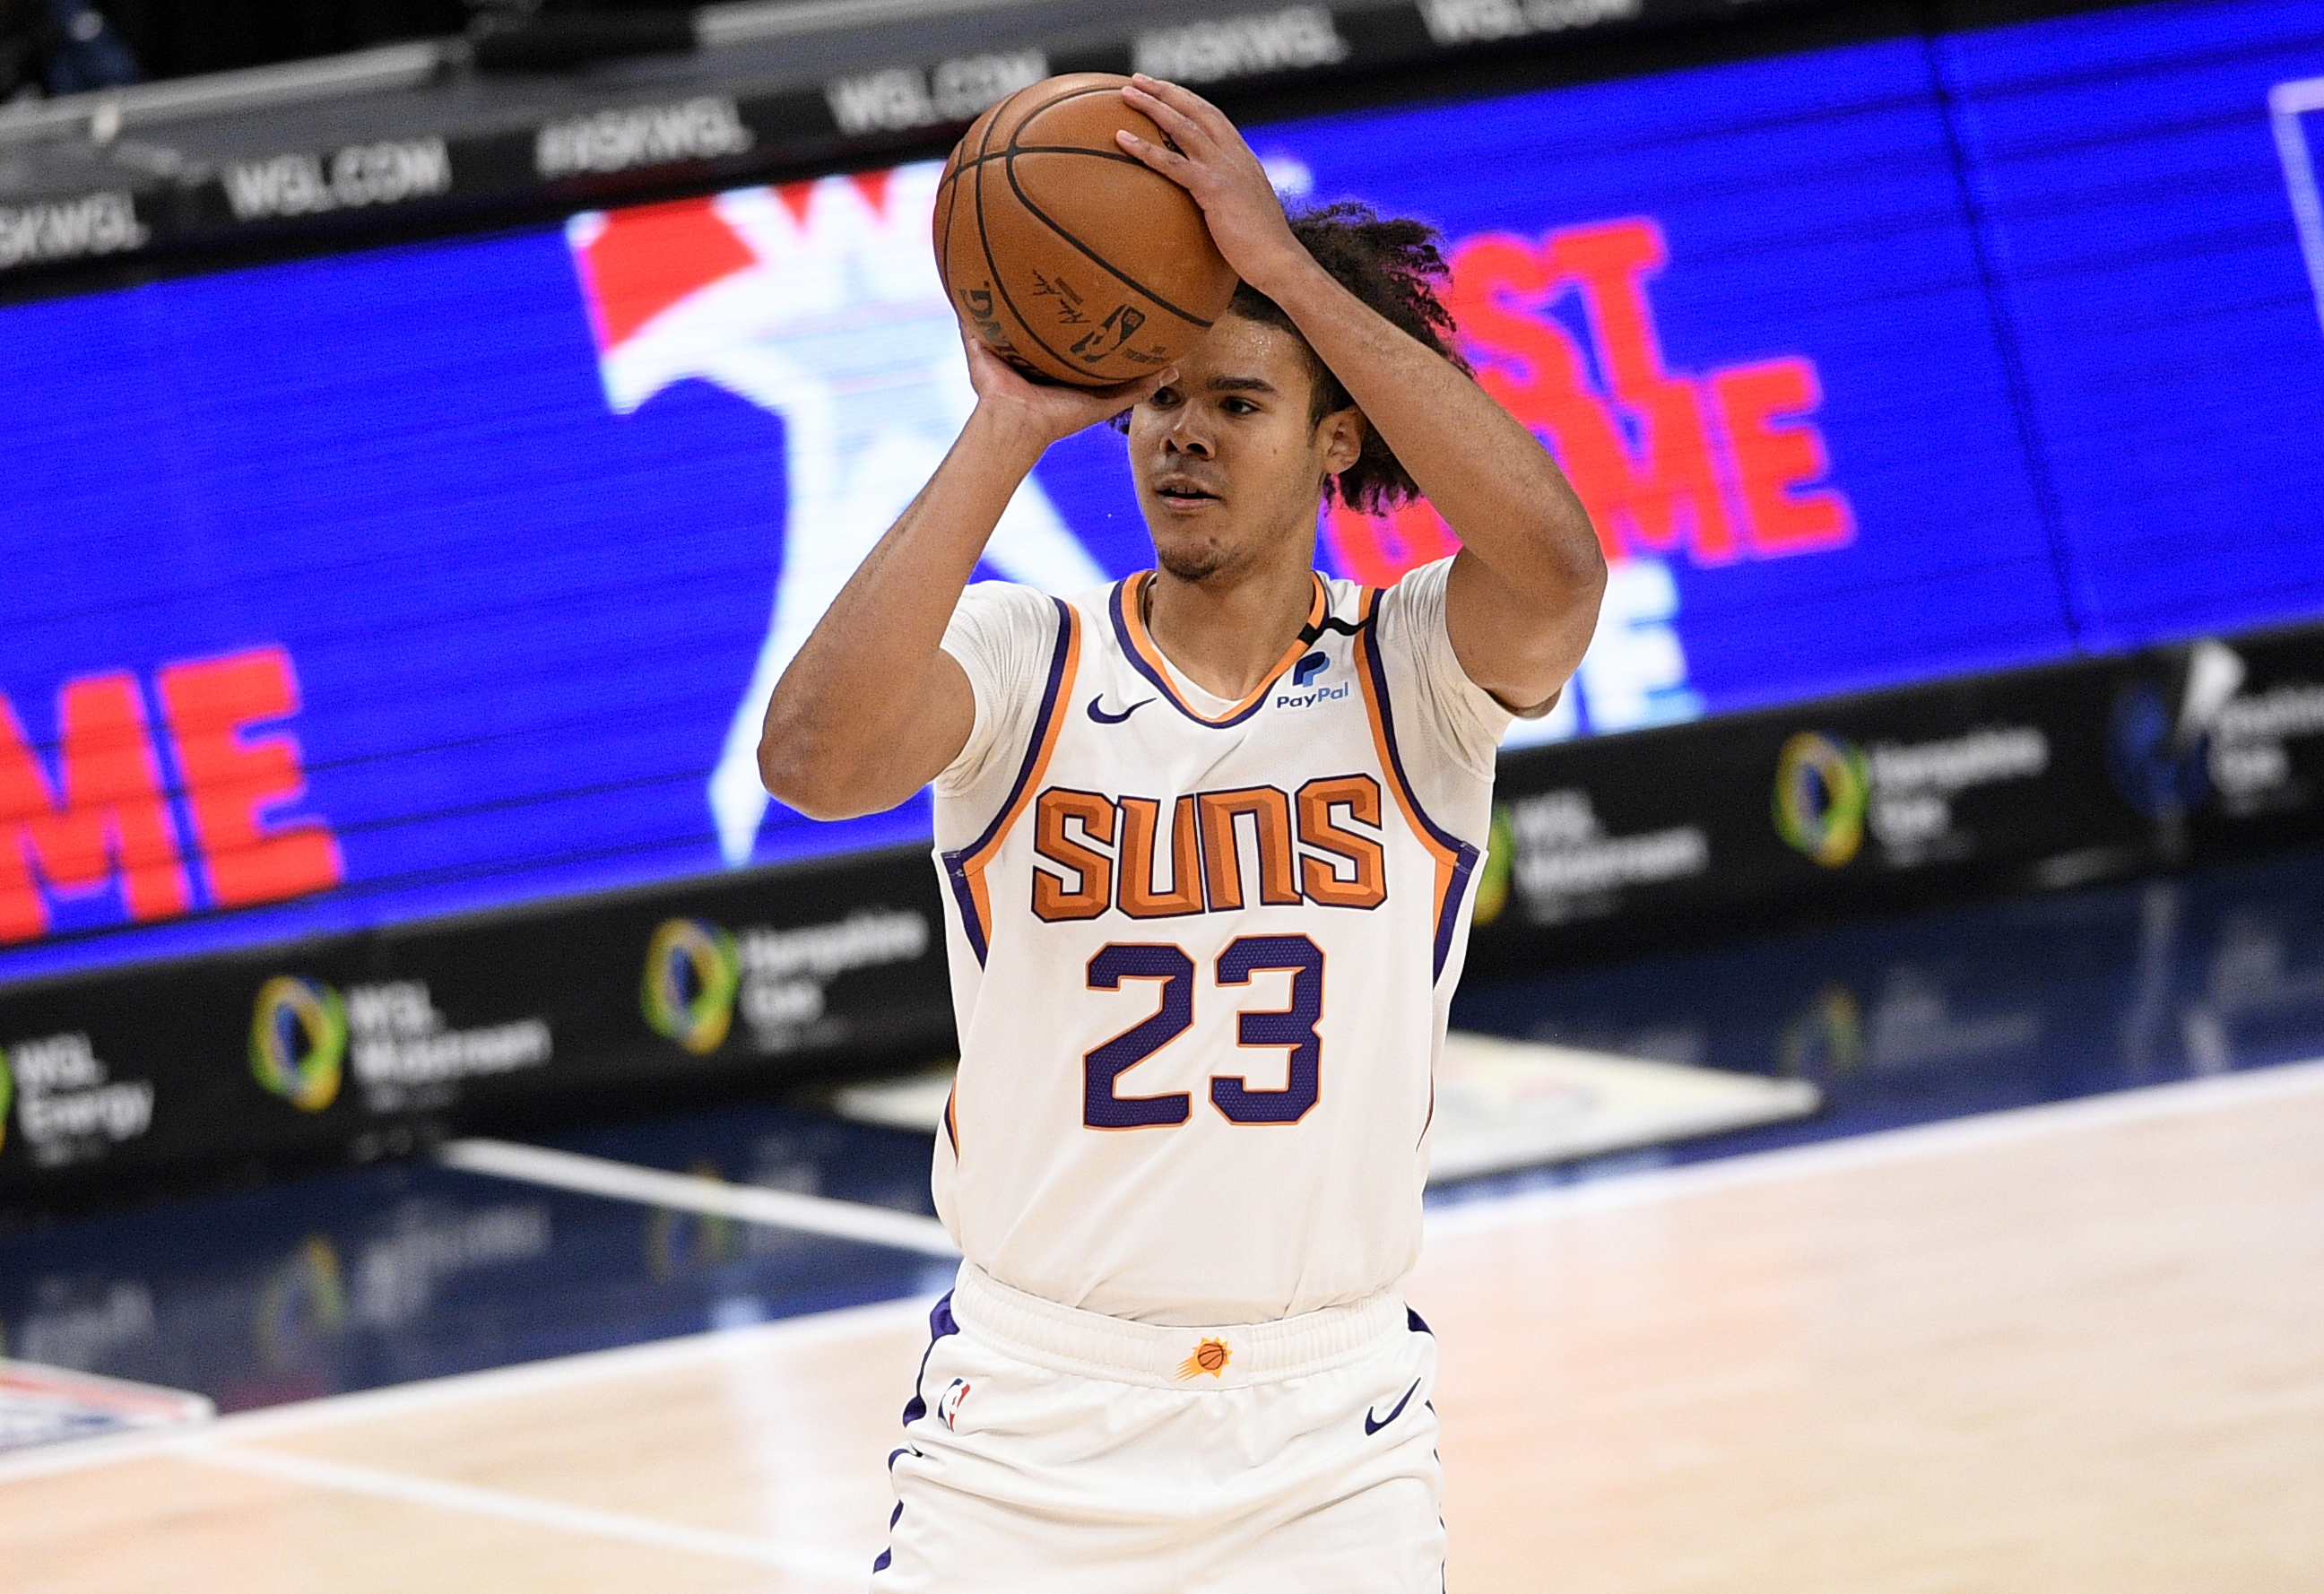 2019 NBA Re-Draft: The way it should have been